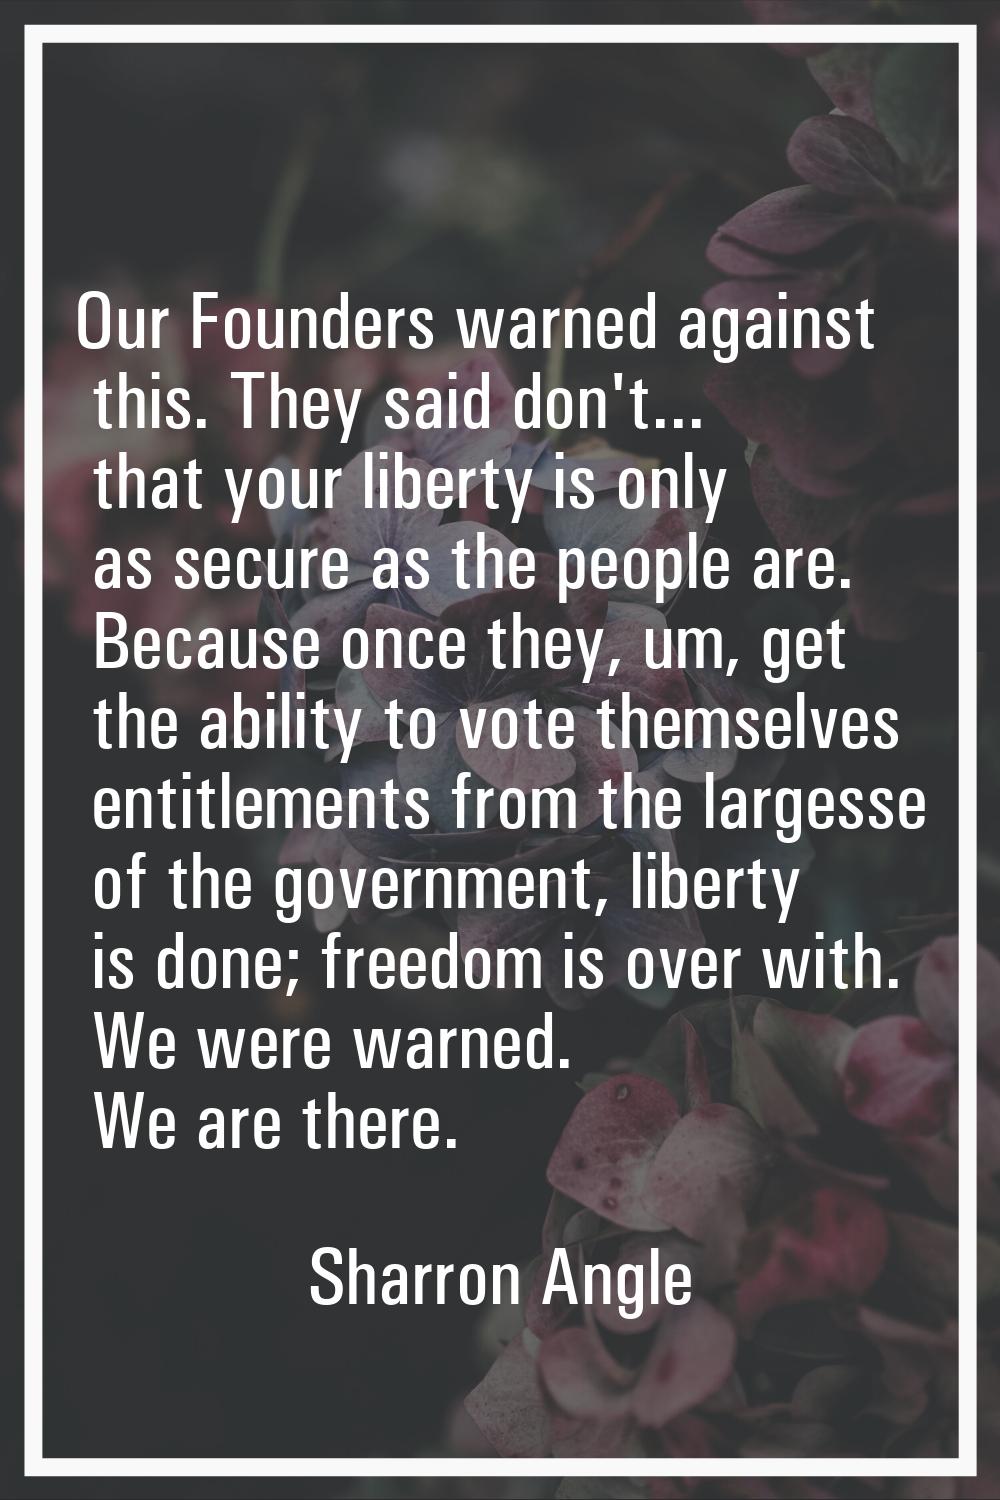 Our Founders warned against this. They said don't... that your liberty is only as secure as the peo